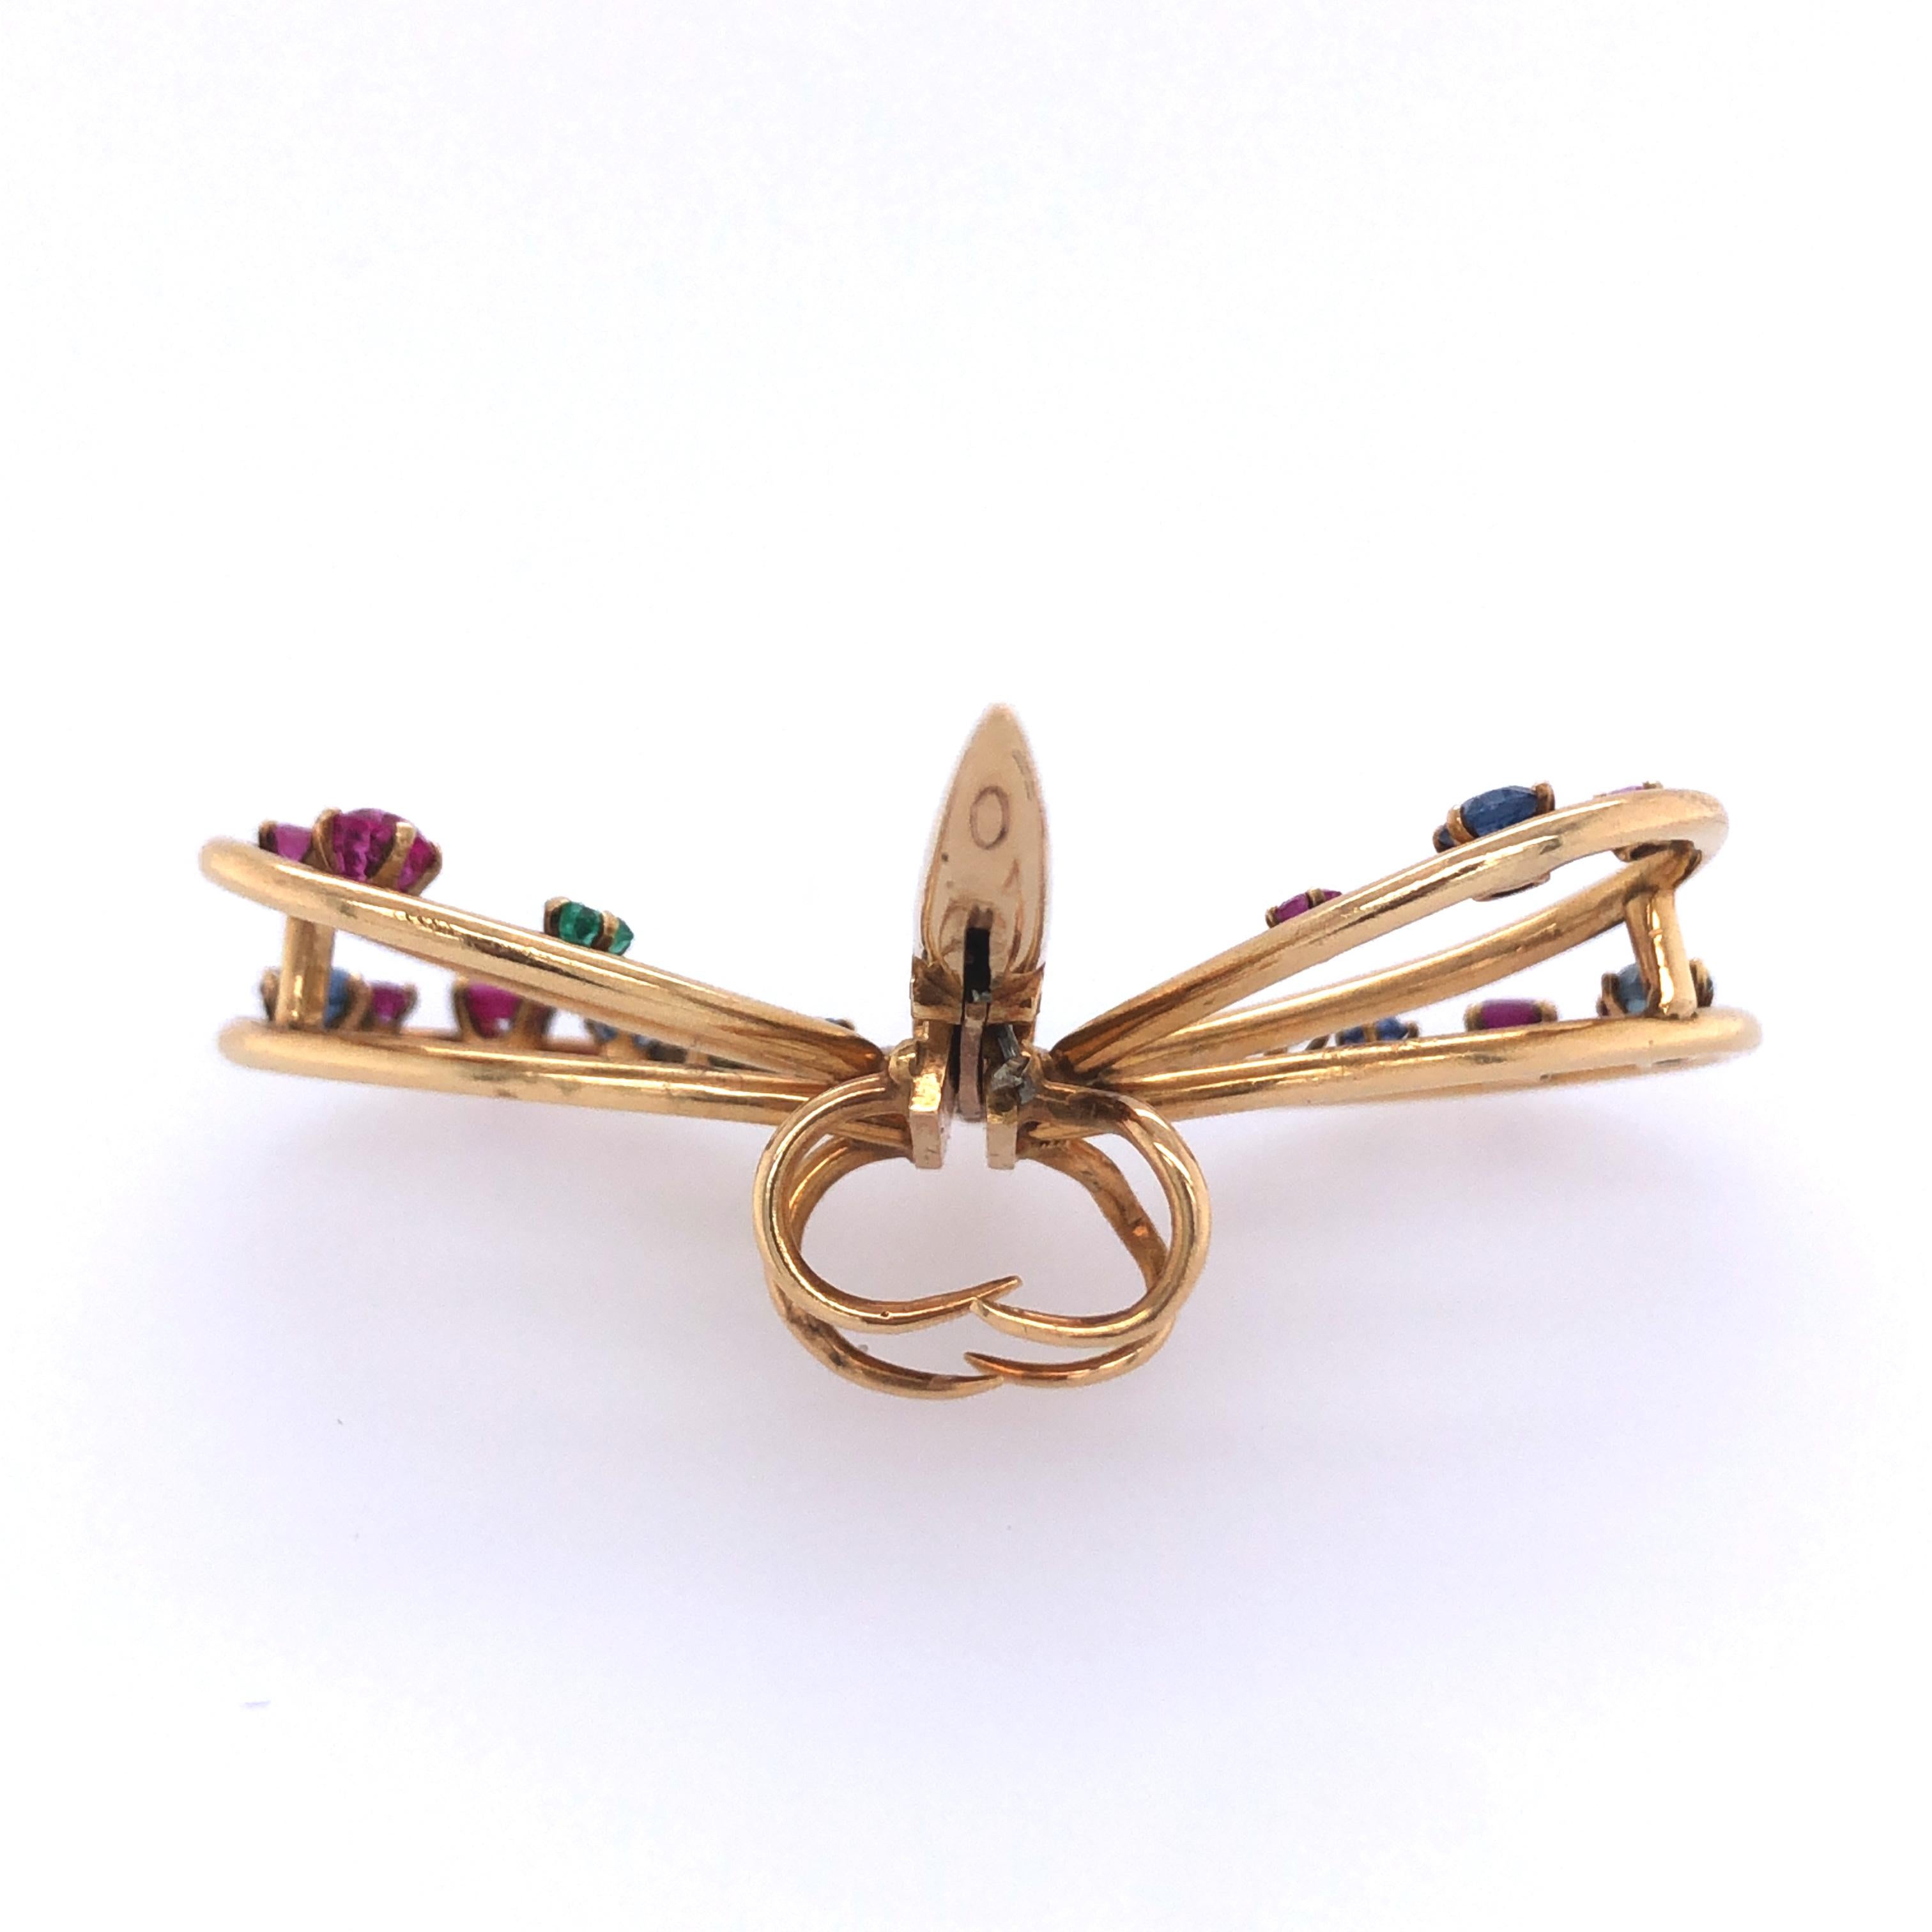 A stylized gold dragonfly with wings of circular or square-cut rubies, sapphires, and emeralds
Yellow gold 1 ¾ x 2 ins; Gross weight 14.6 9.3 dwts 